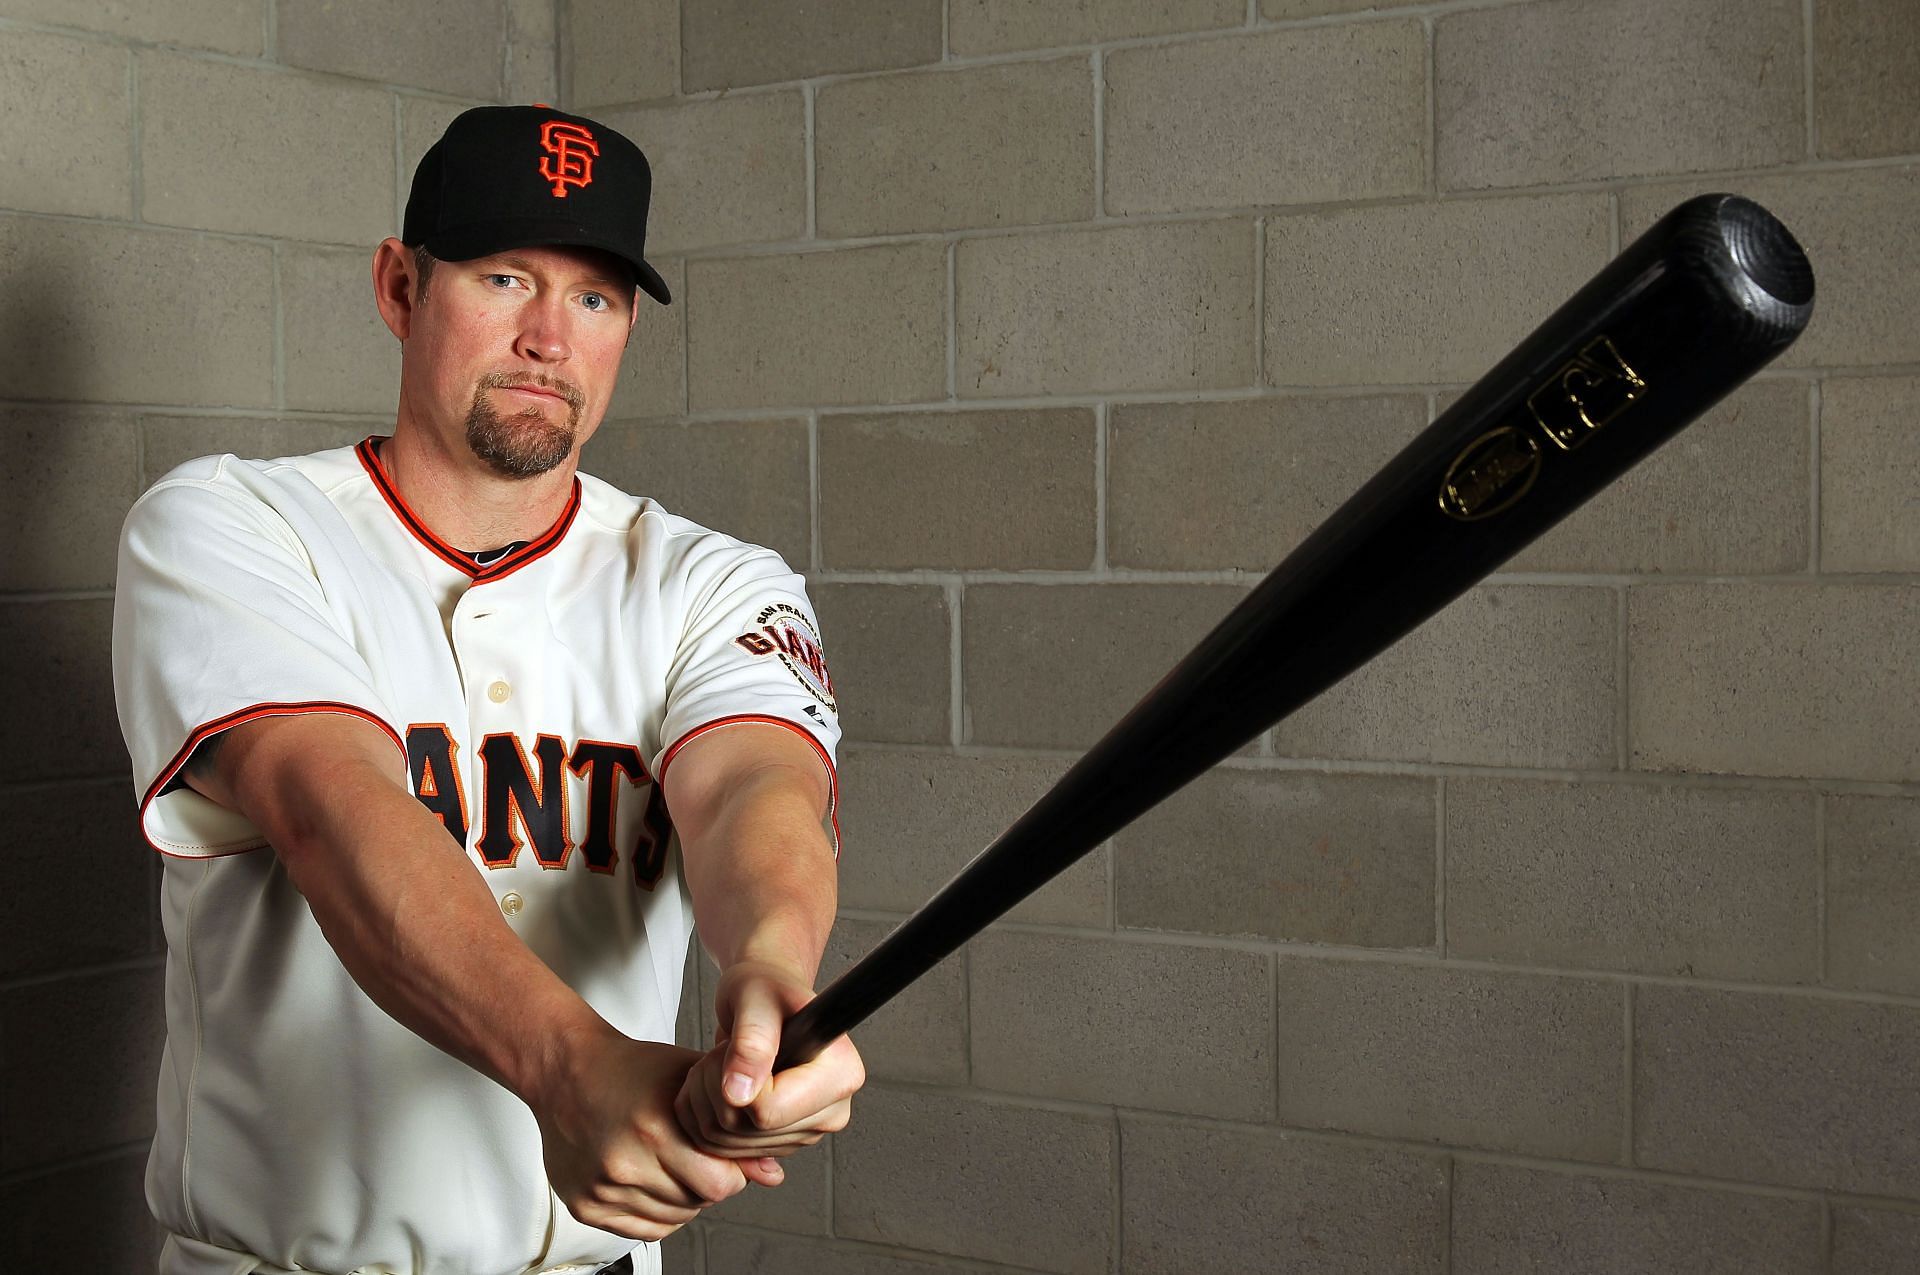 San Francisco Giants Photo Day: SCOTTSDALE, AZ - MARCH 01: Aubrey of the San Francisco Giants poses during spring training photo day on March 1, 2012, in Scottsdale, Arizona. (Photo by Jamie Squire/Getty Images)